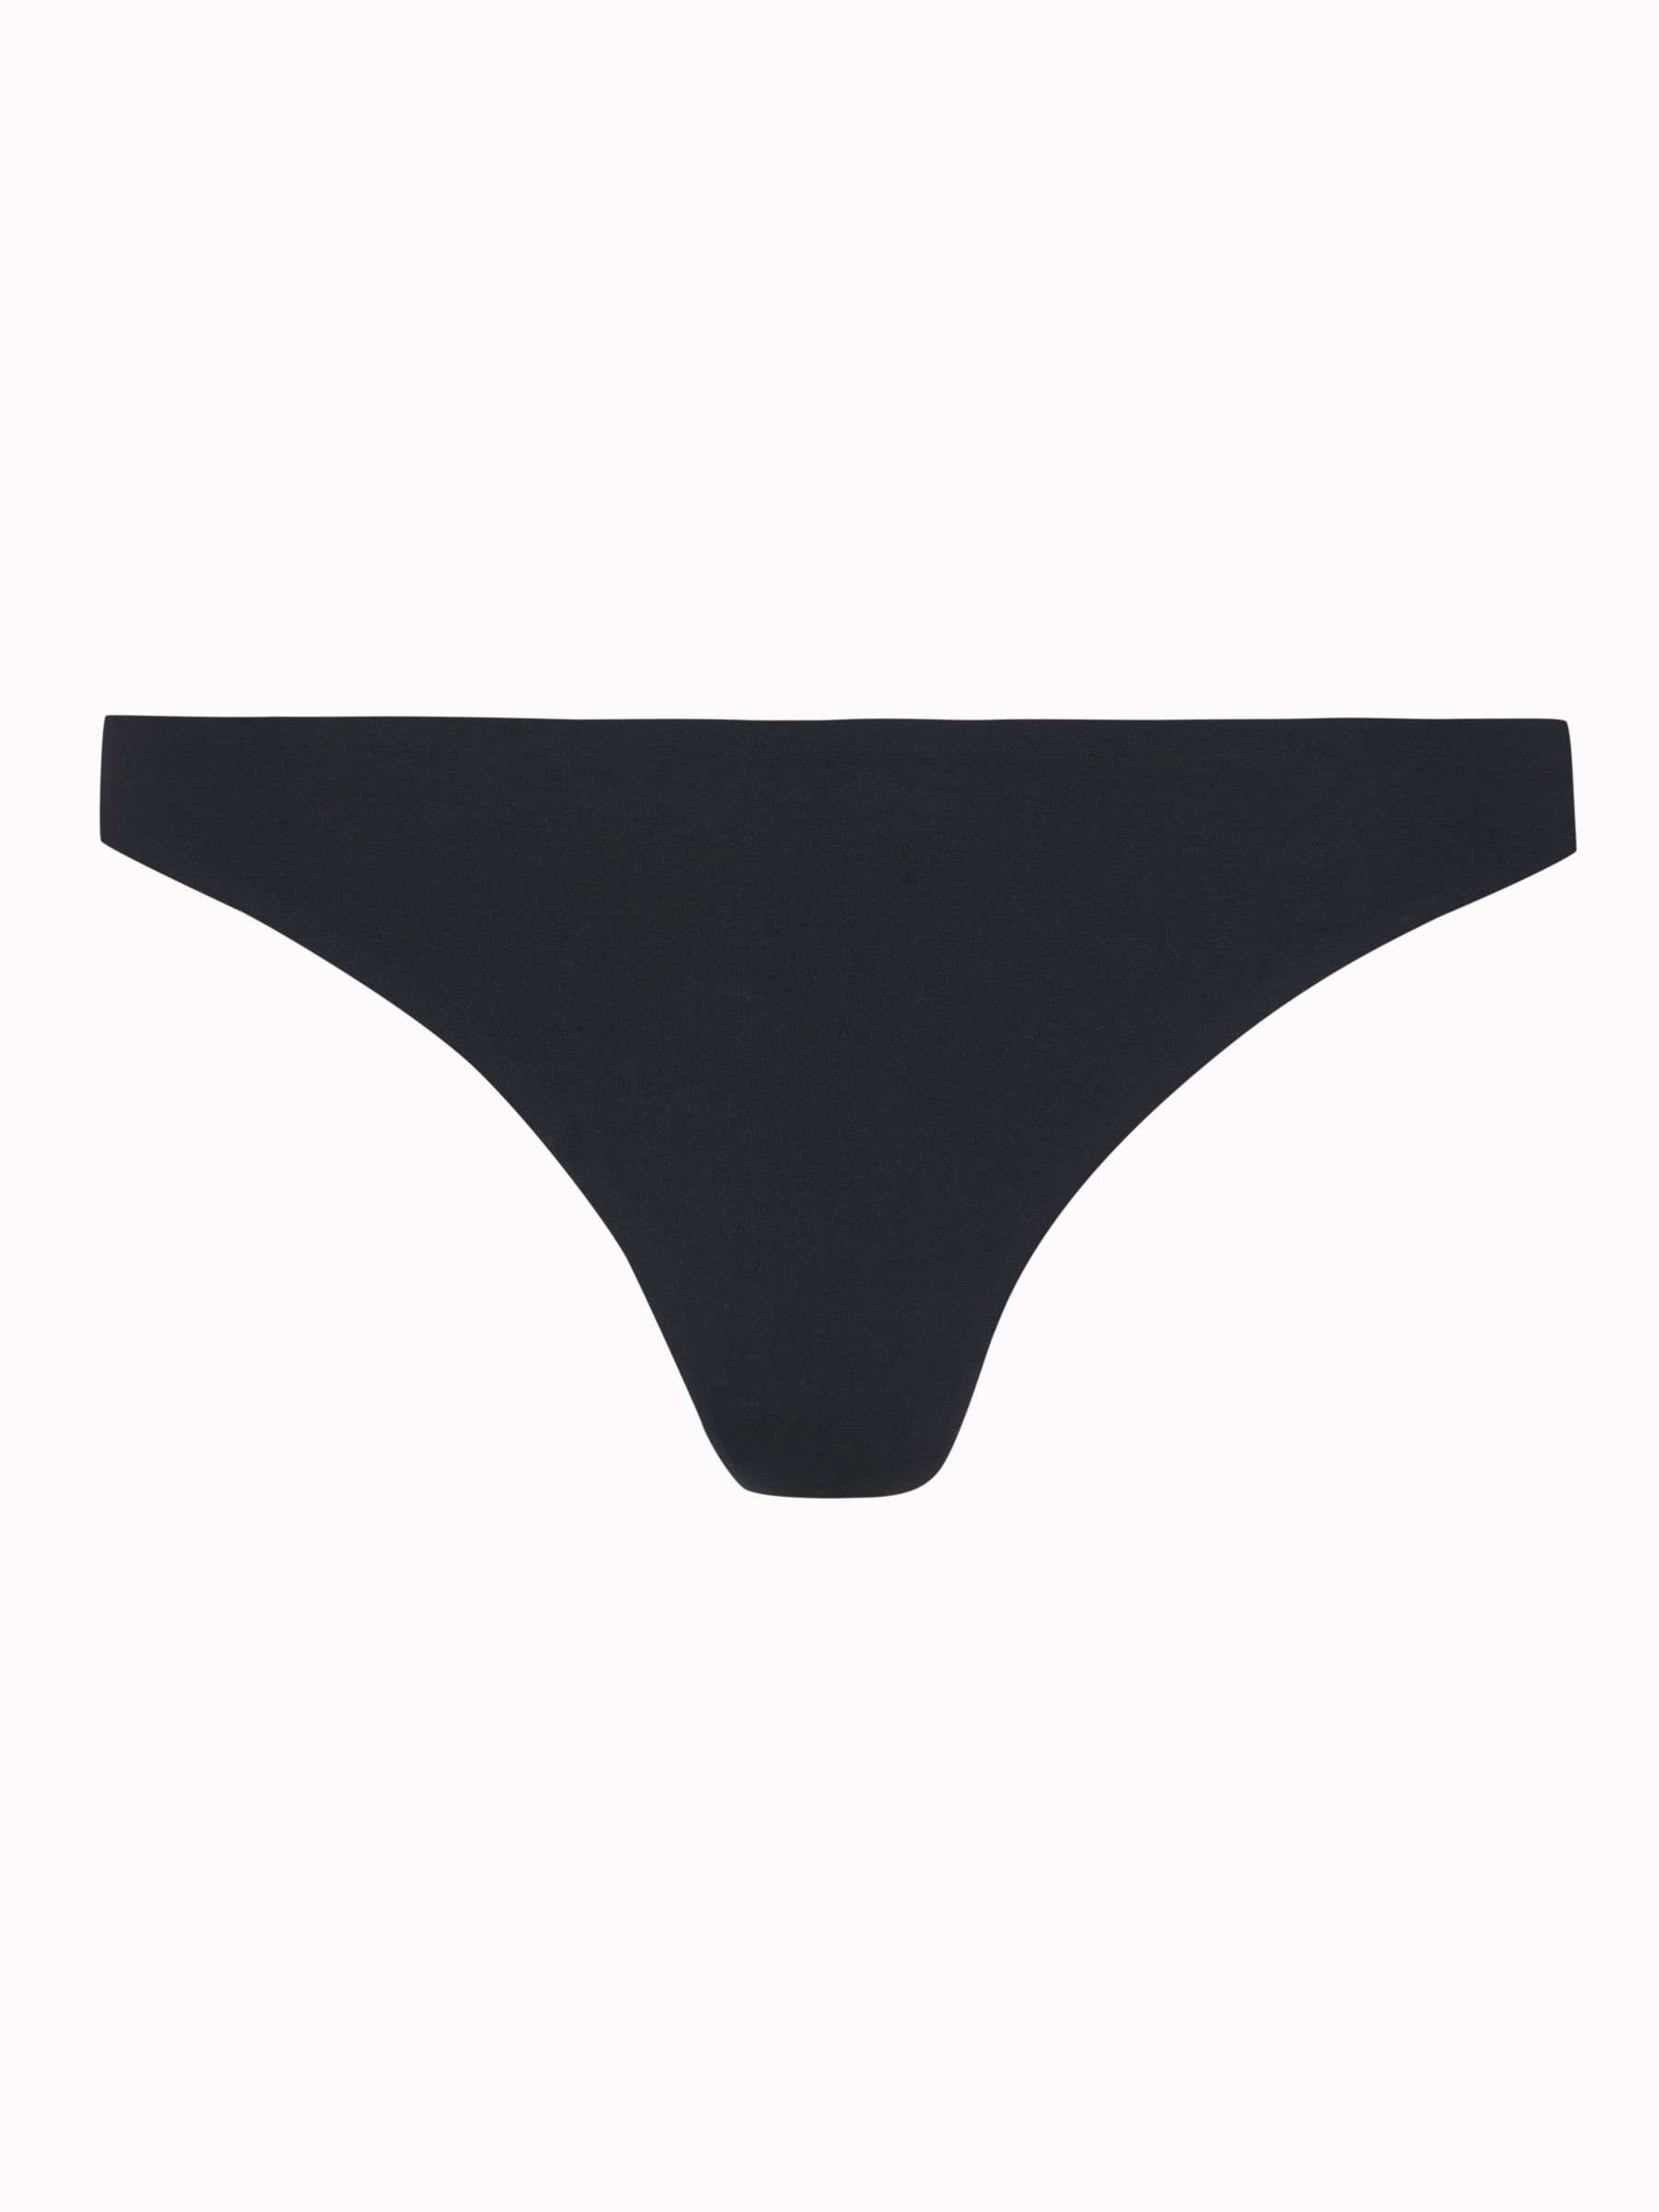 Sweaty Betty Barely There Thong, Black, M